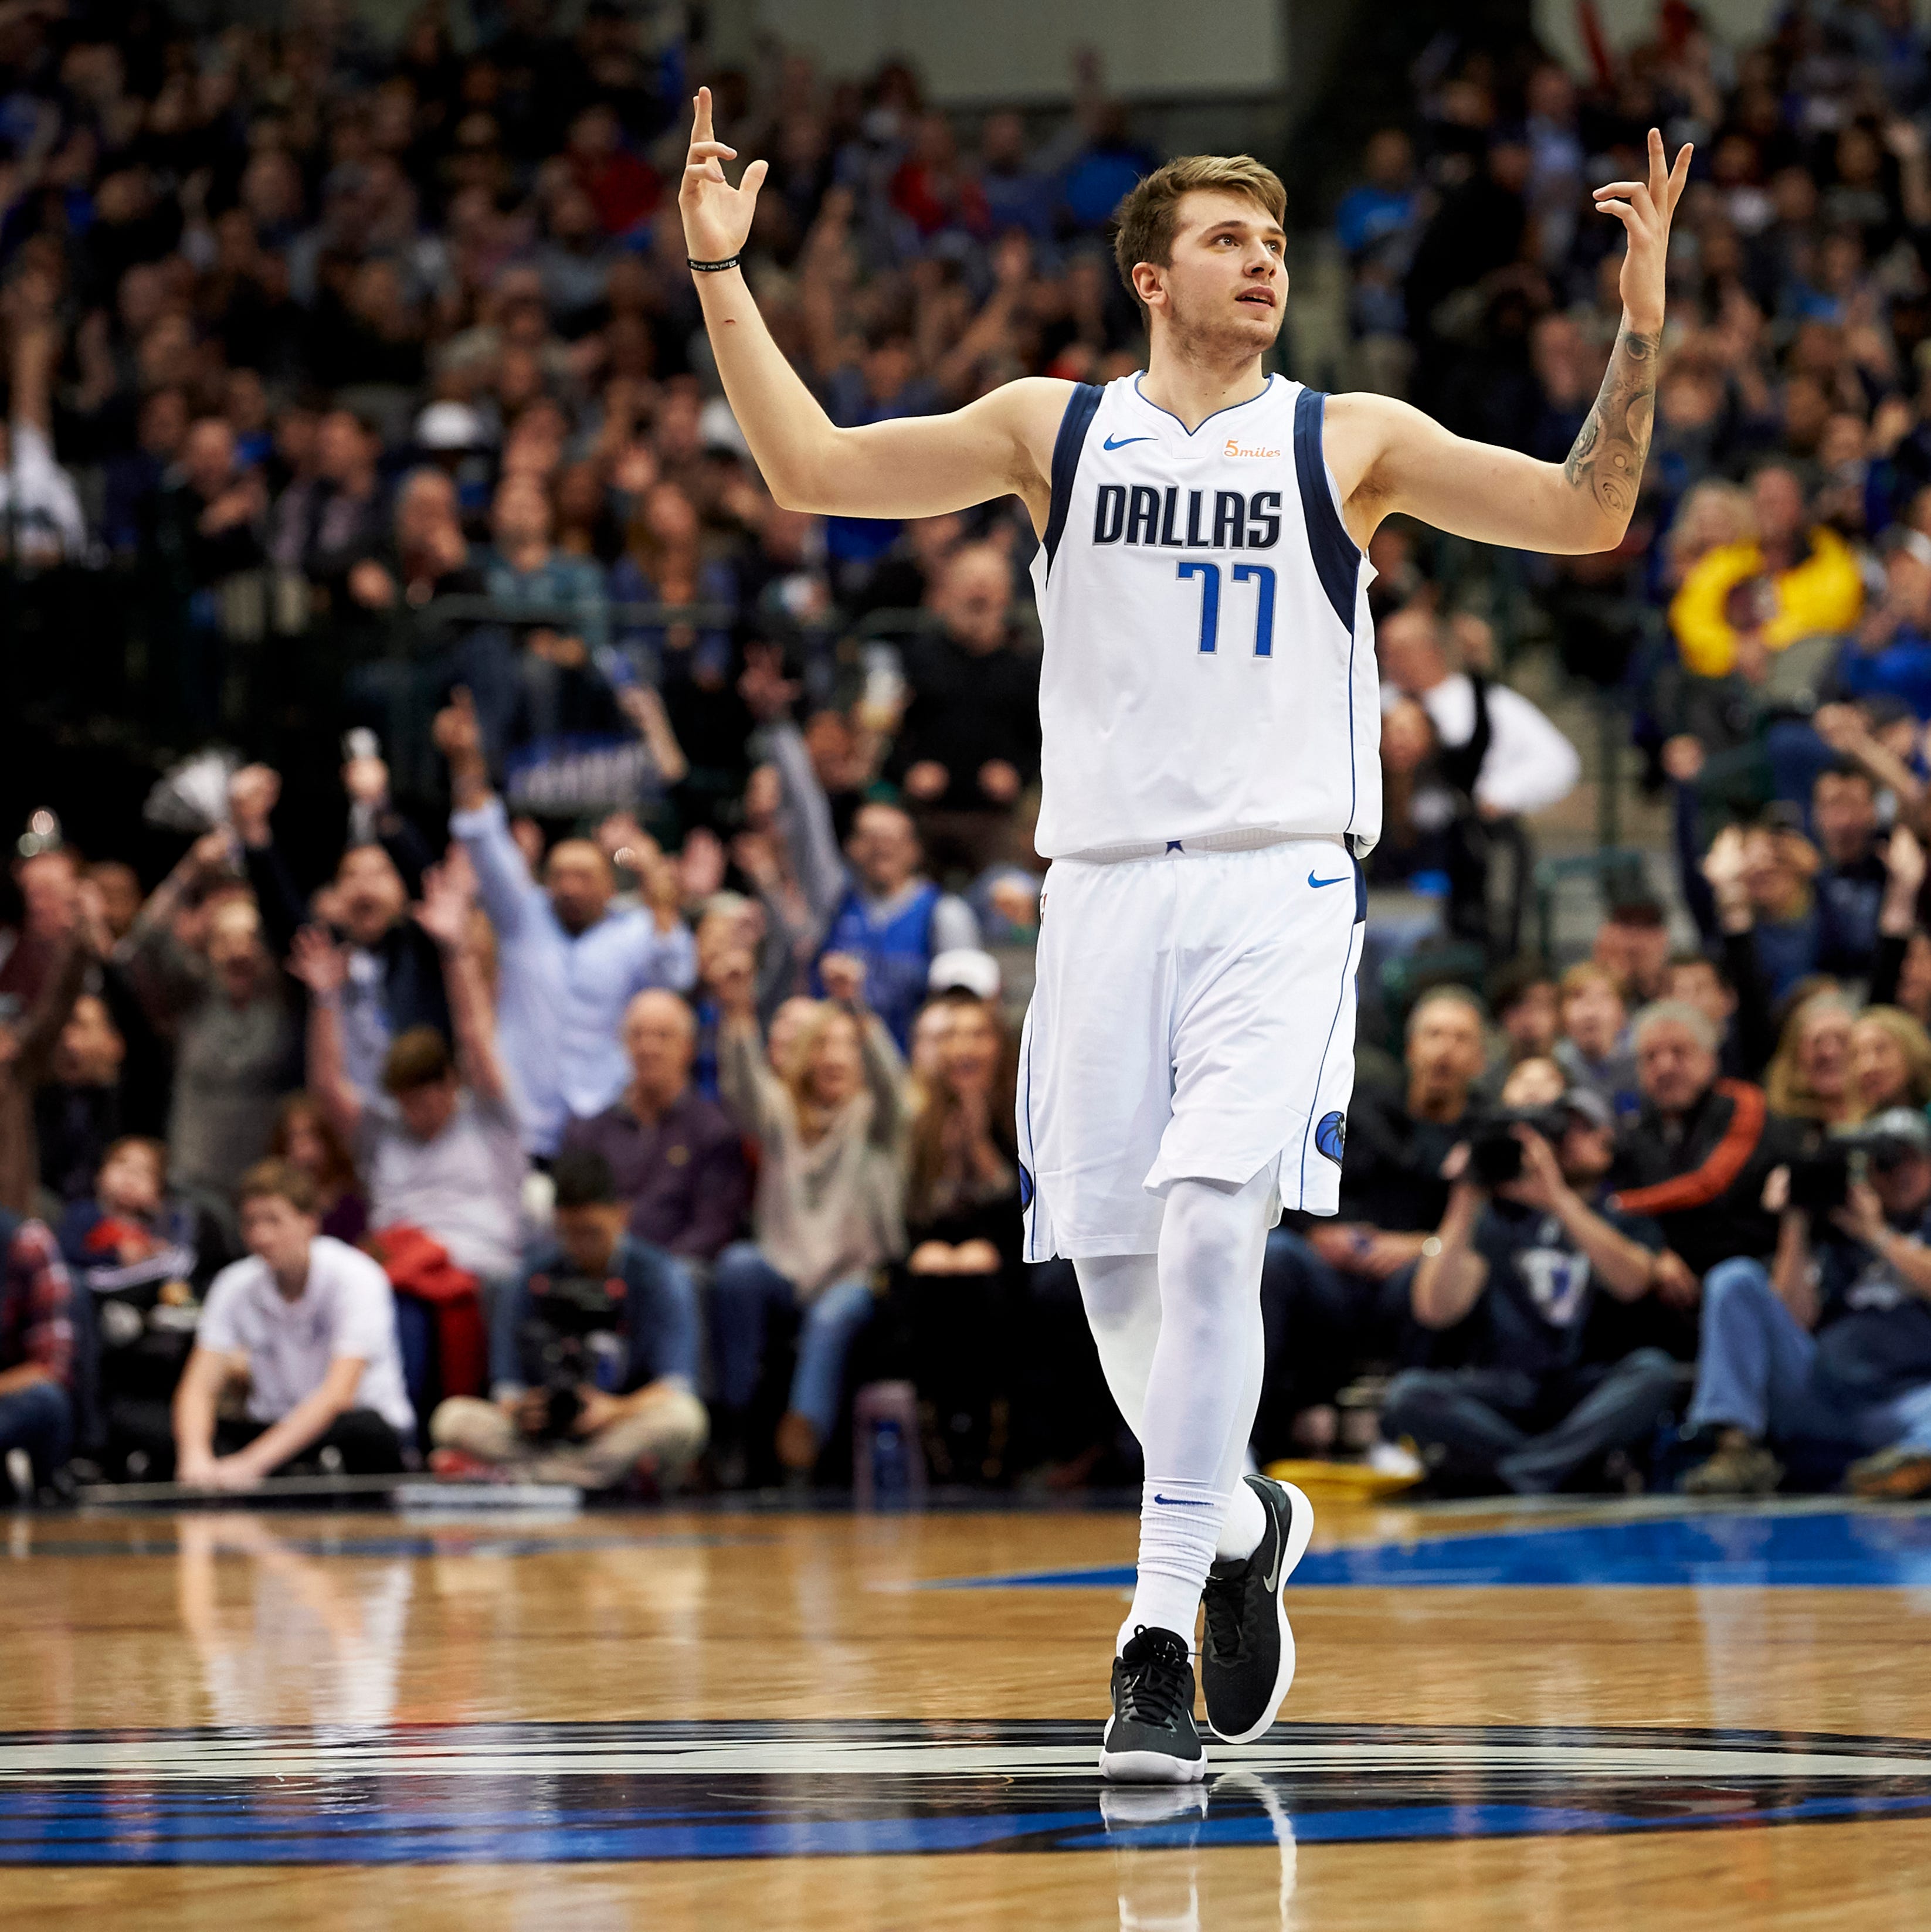 Luka Doncic scored 11 straight points late in the fourth quarter to rally t...